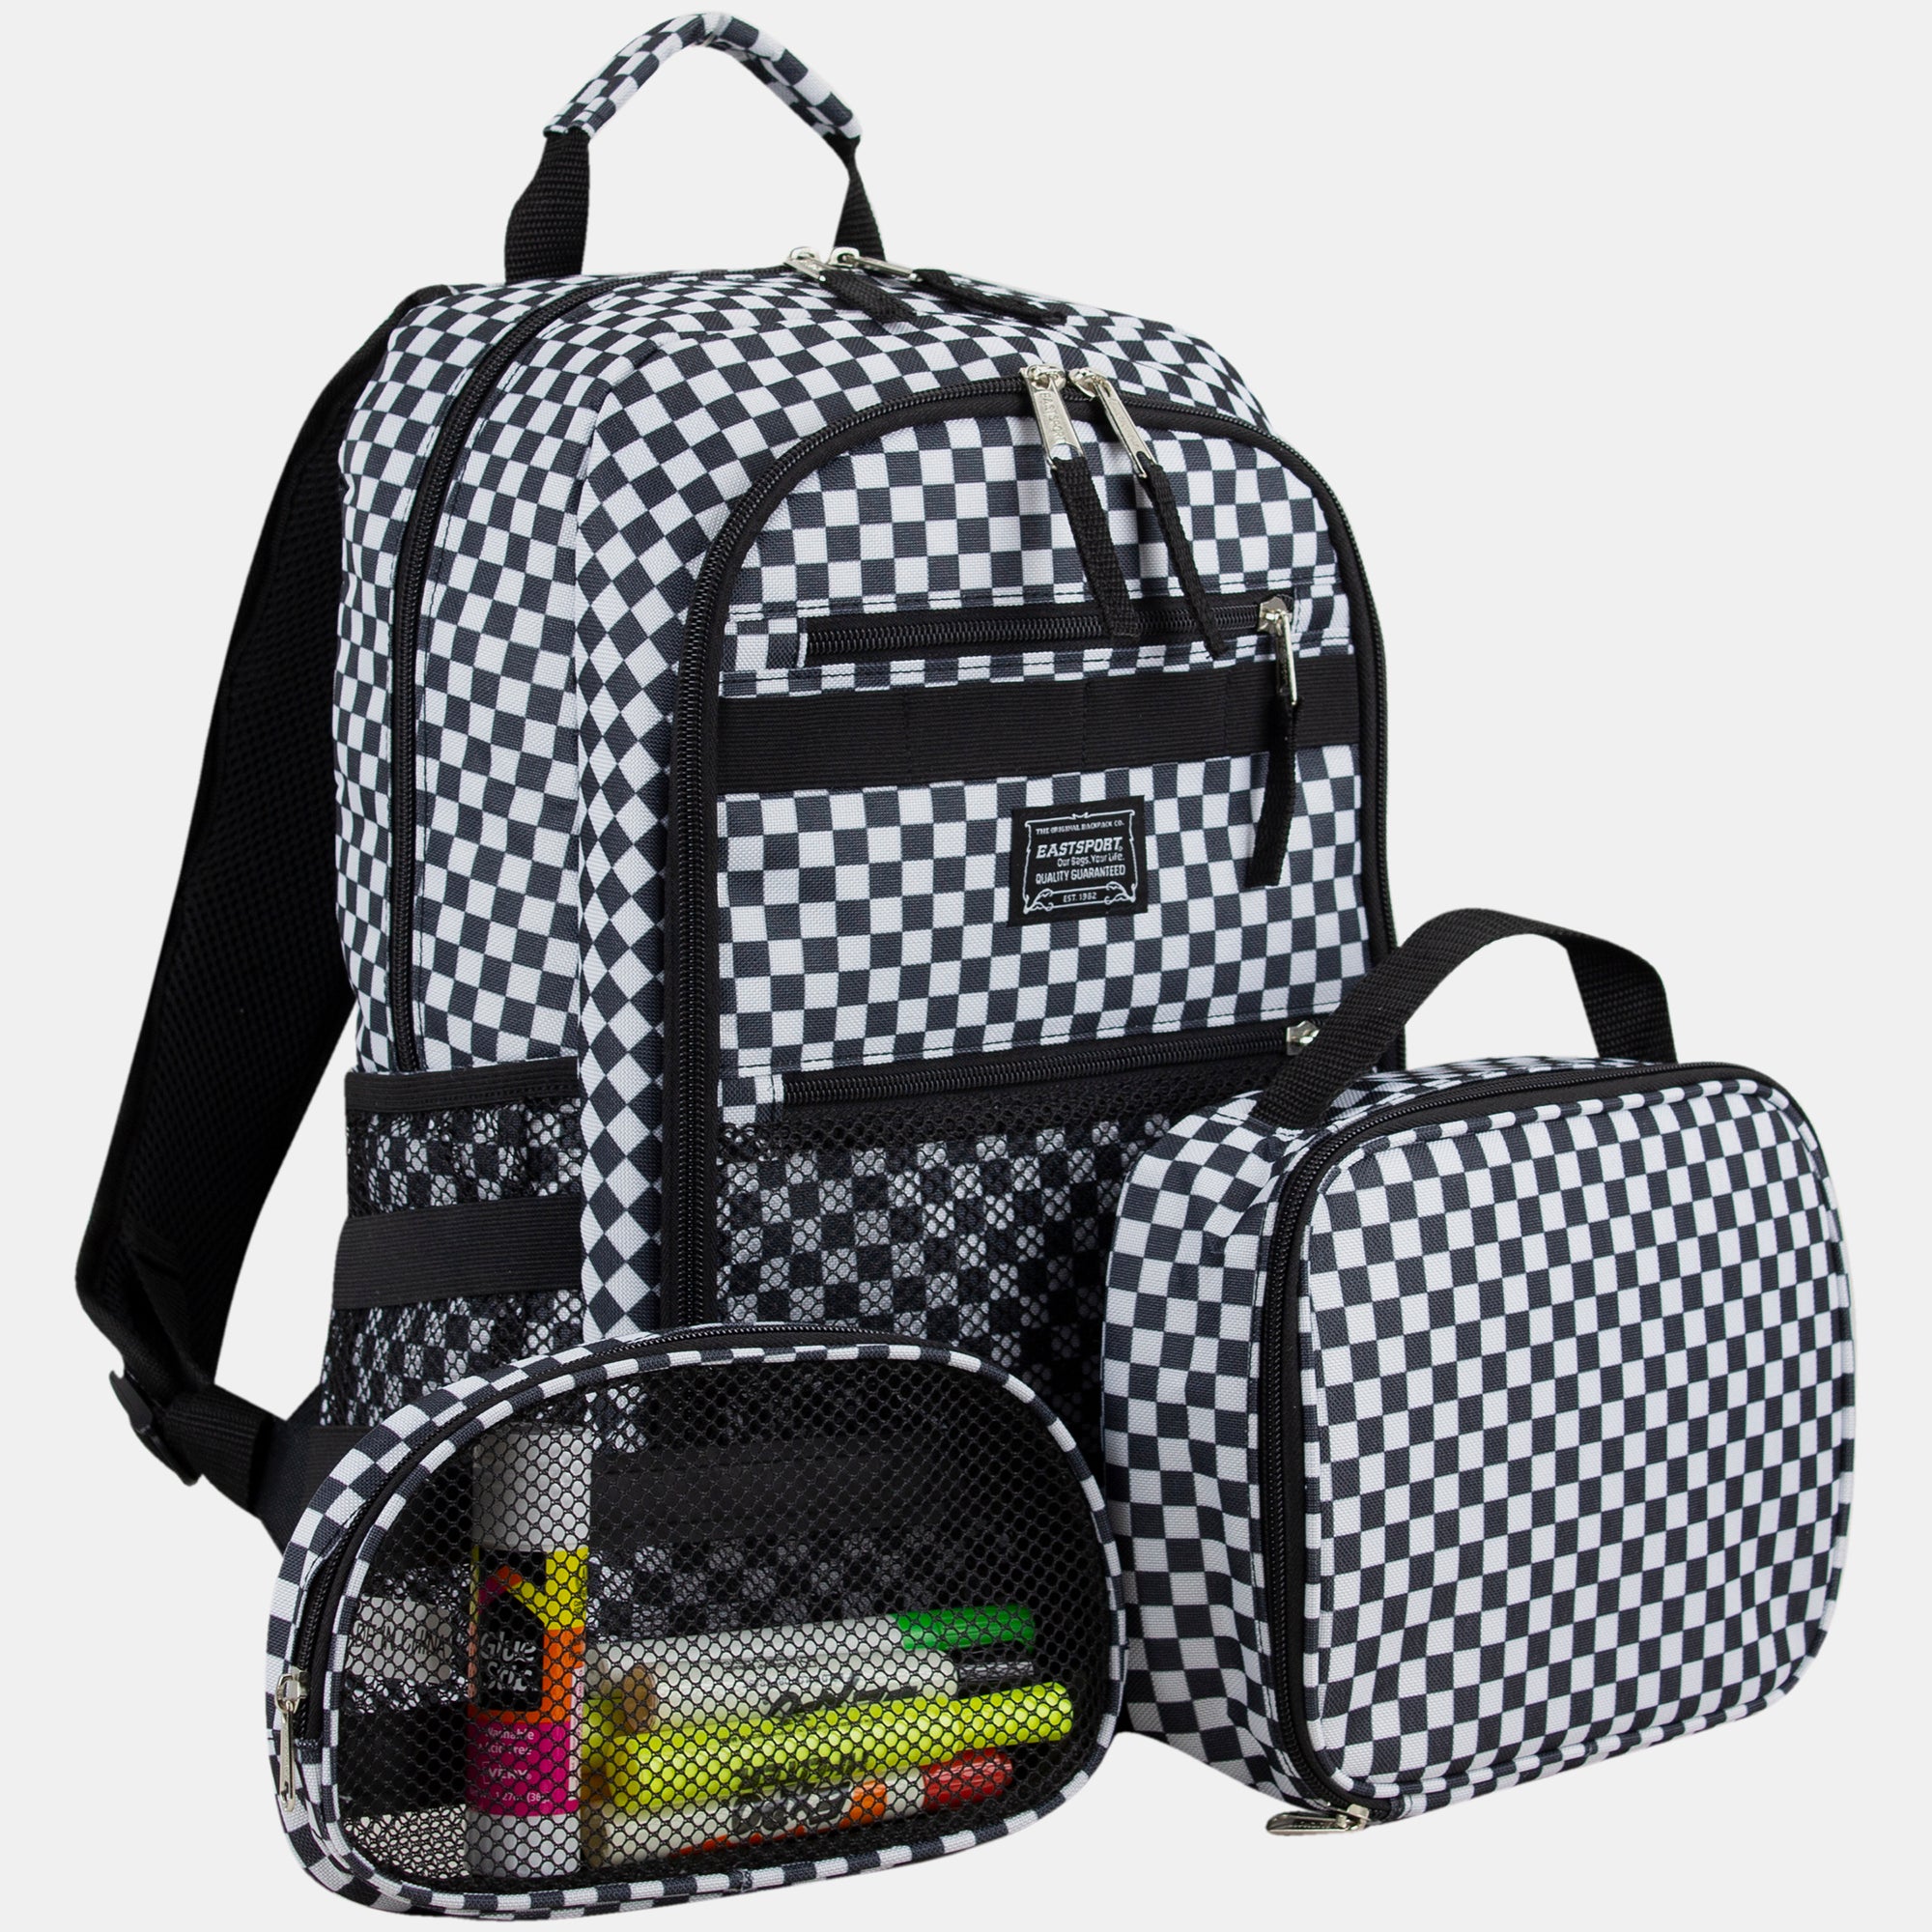 Lunch Kit Combo Backpack